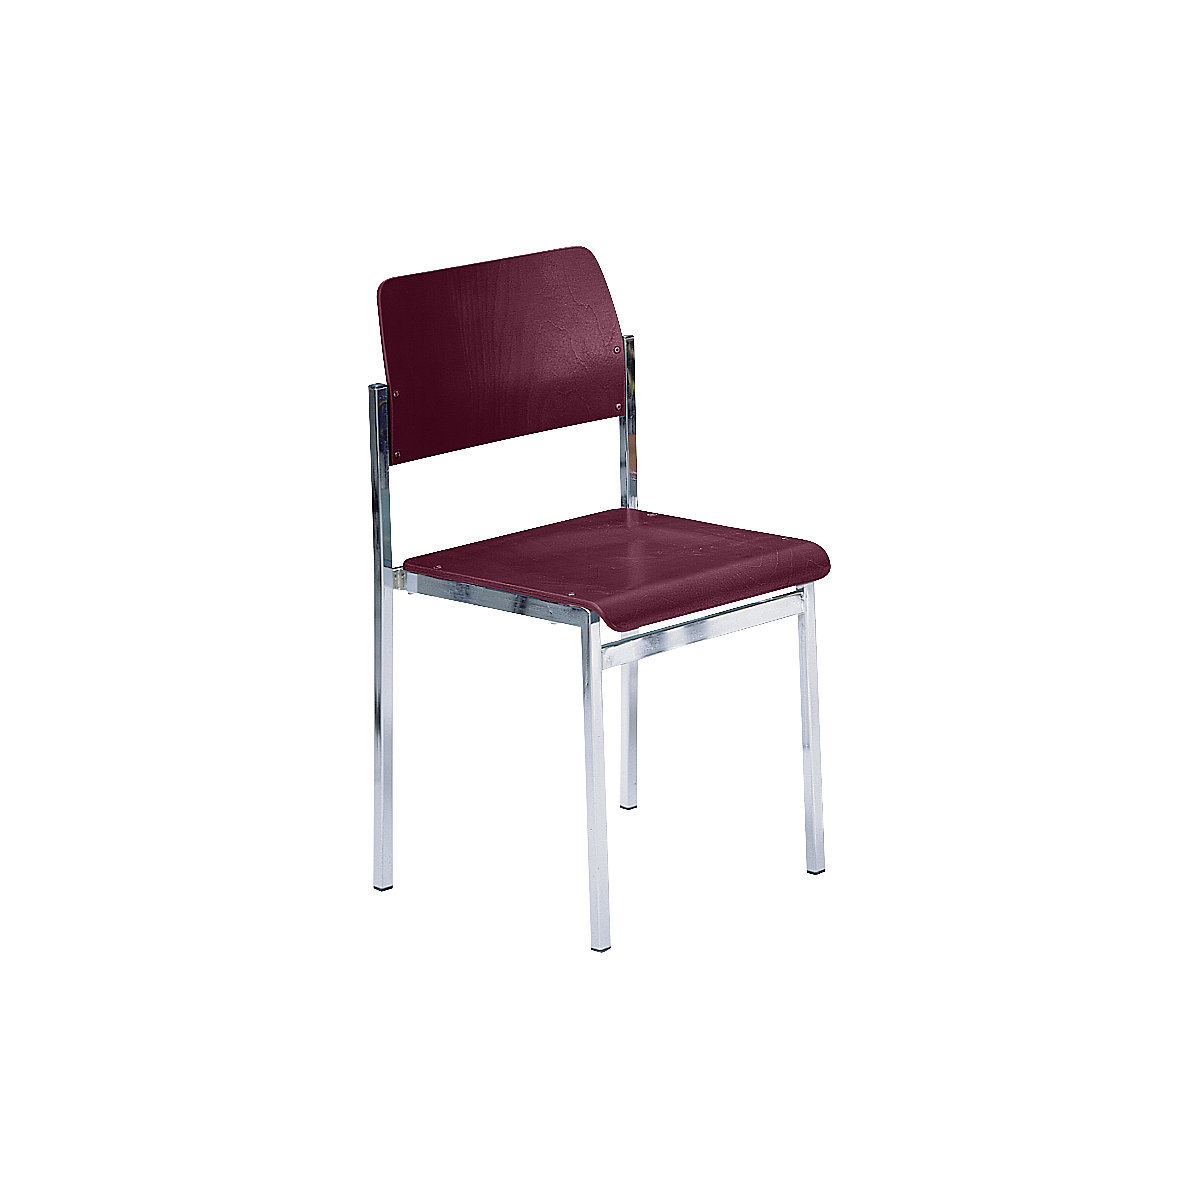 SUSAN stacking chair, chrome plated frame, pack of 4, wood in bordeaux-4